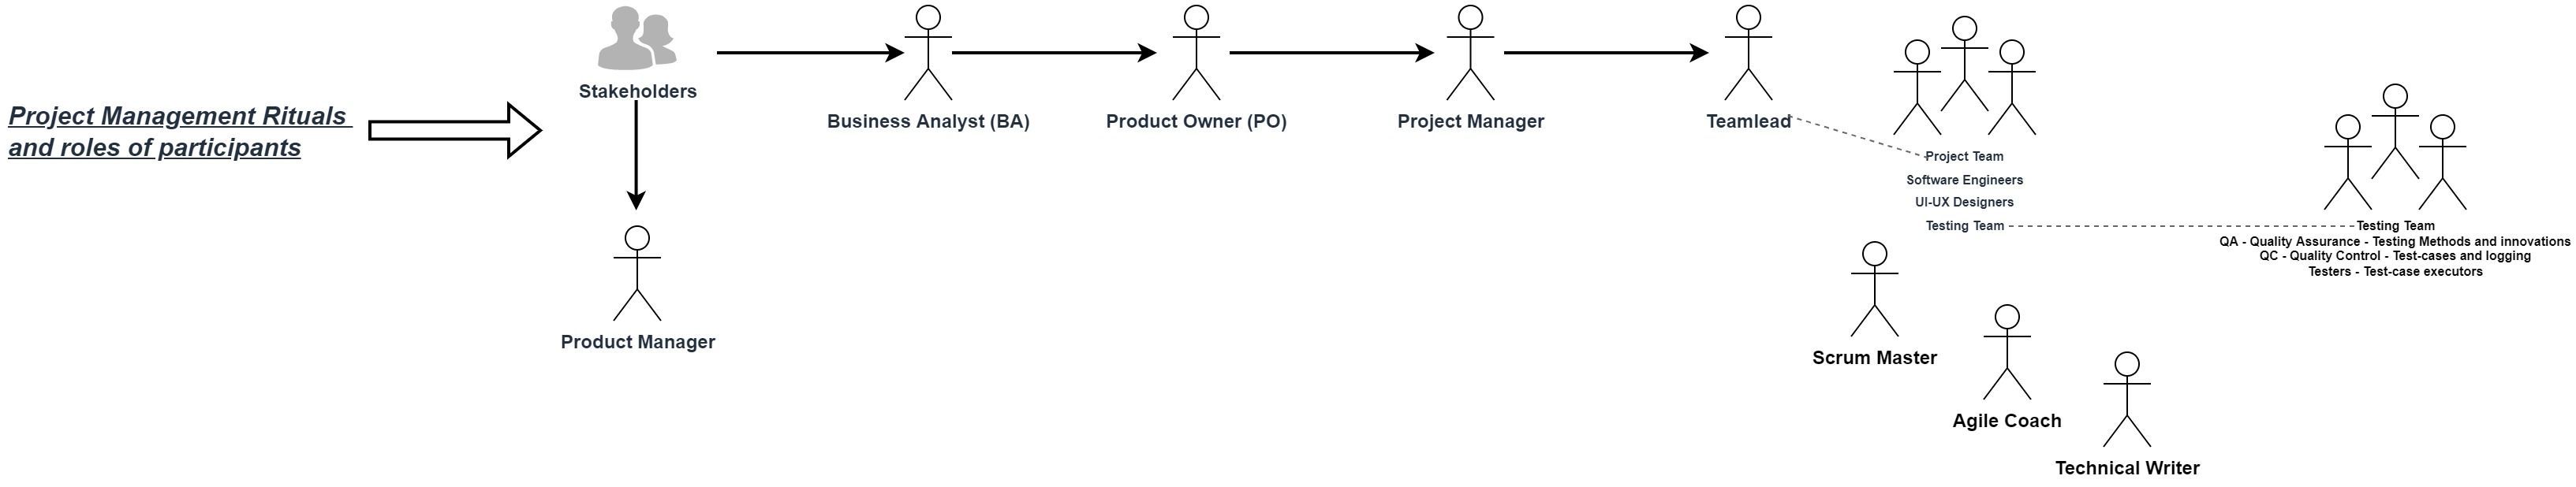 Diagram showing project management rituals and roles of participants